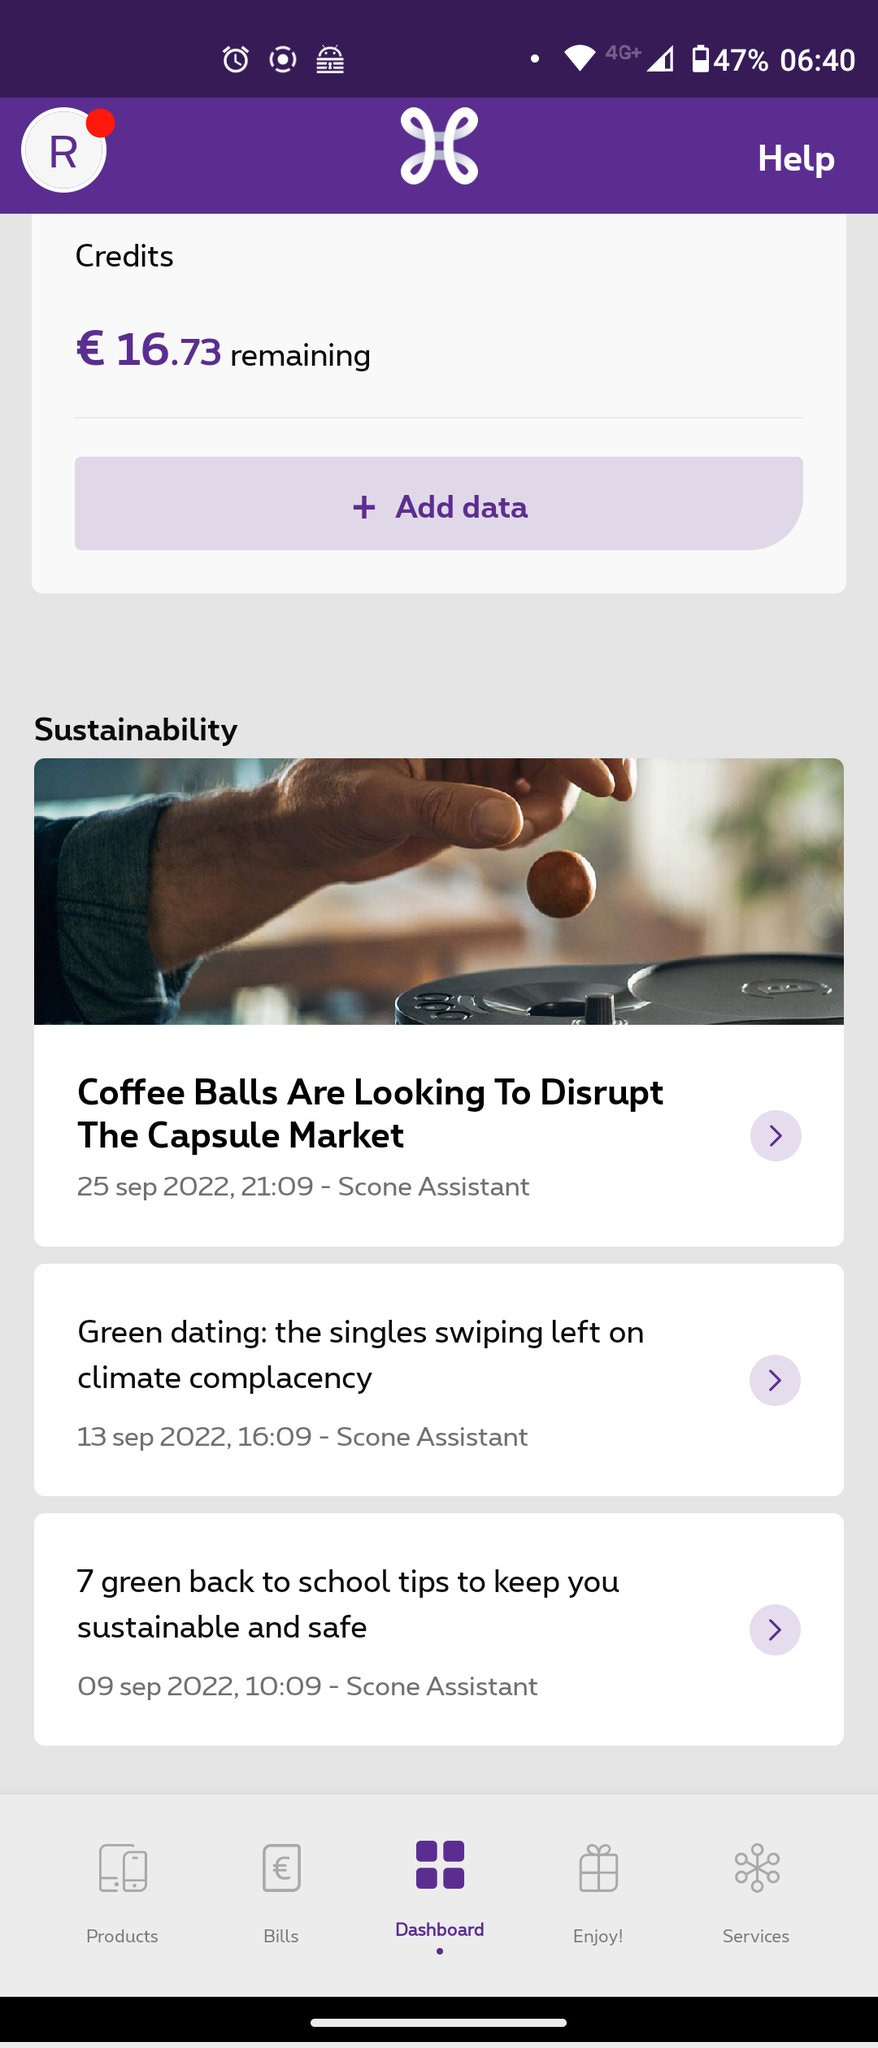 A screenshot of a support app containing native ads for coffee balls, sustainable dating and green school transport